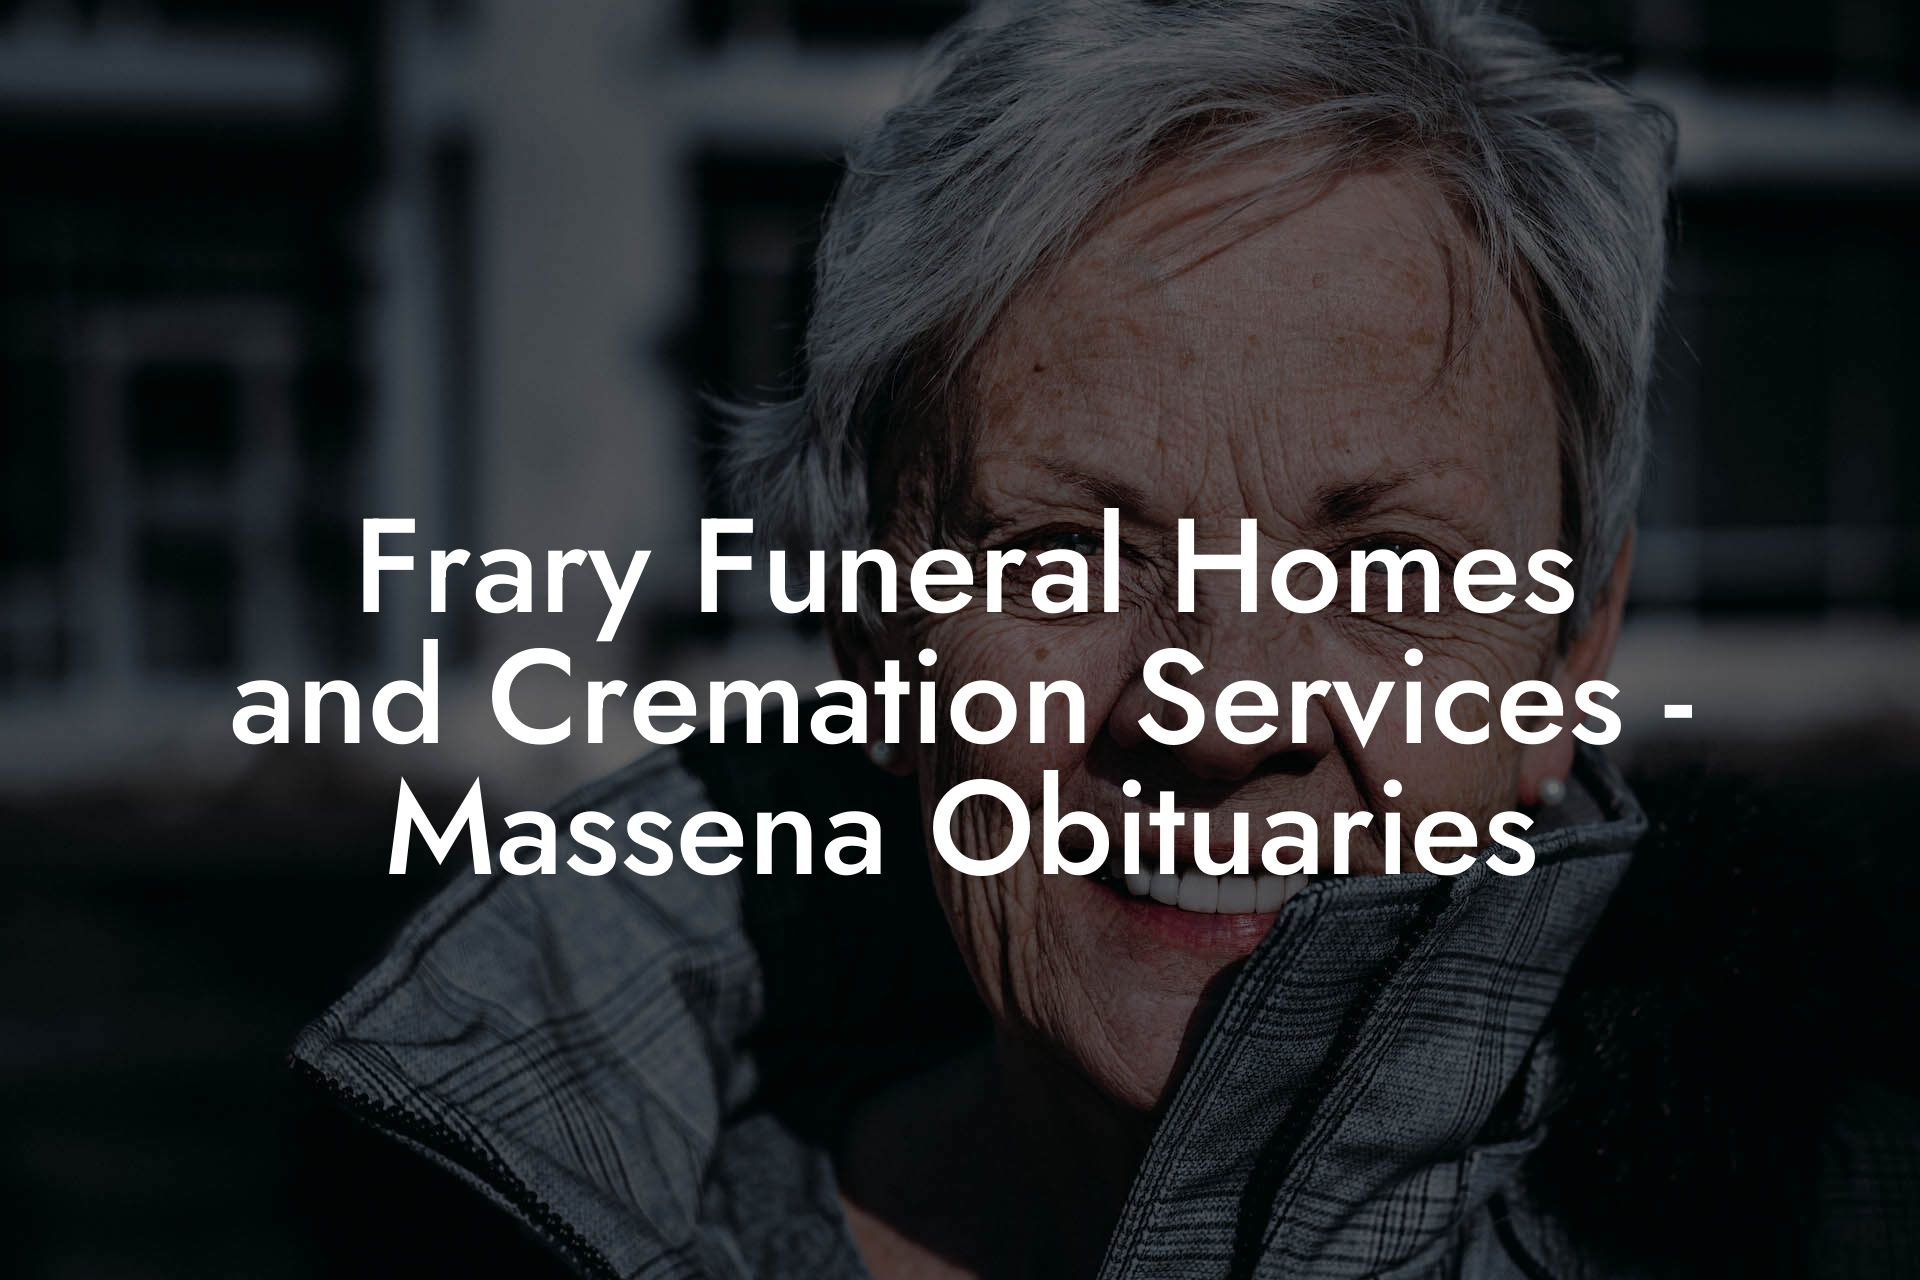 Frary Funeral Homes and Cremation Services - Massena Obituaries